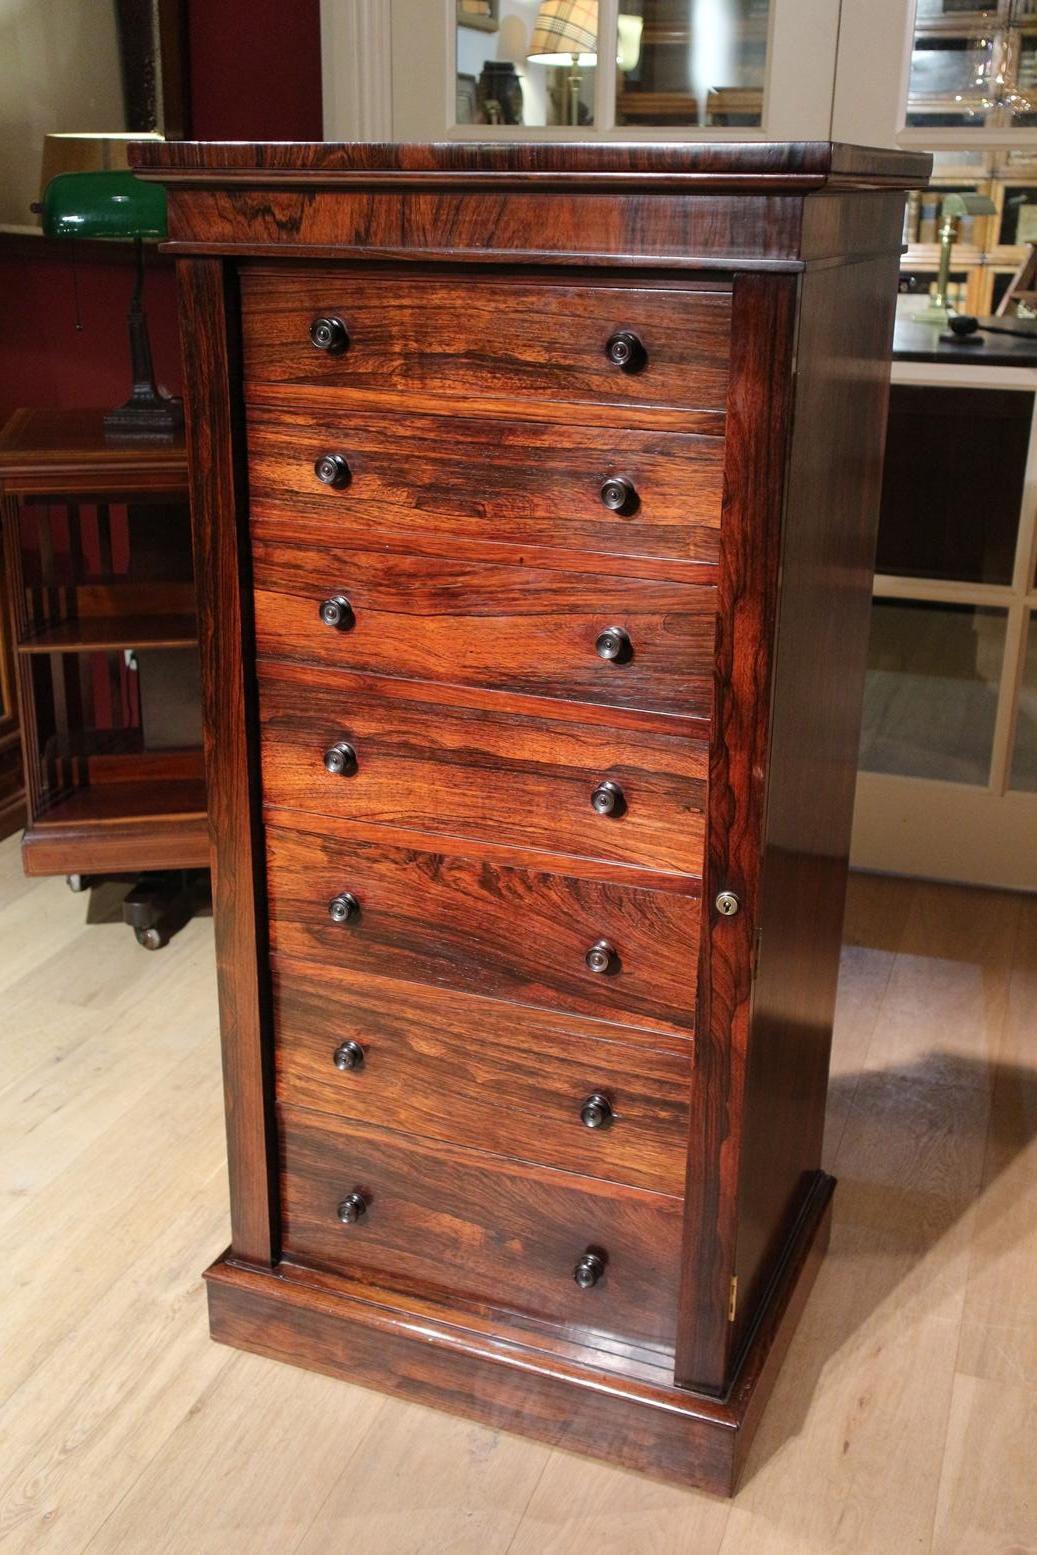 Impressive antique rosewood Wellington chest of drawers in original condition. Beautiful drawing and color scheme of the rosewood. Nice and practical furniture
Origin: England
Period: circa 1820
Size: Bro. 60 cm, x 45 cm x H. 125 cm.